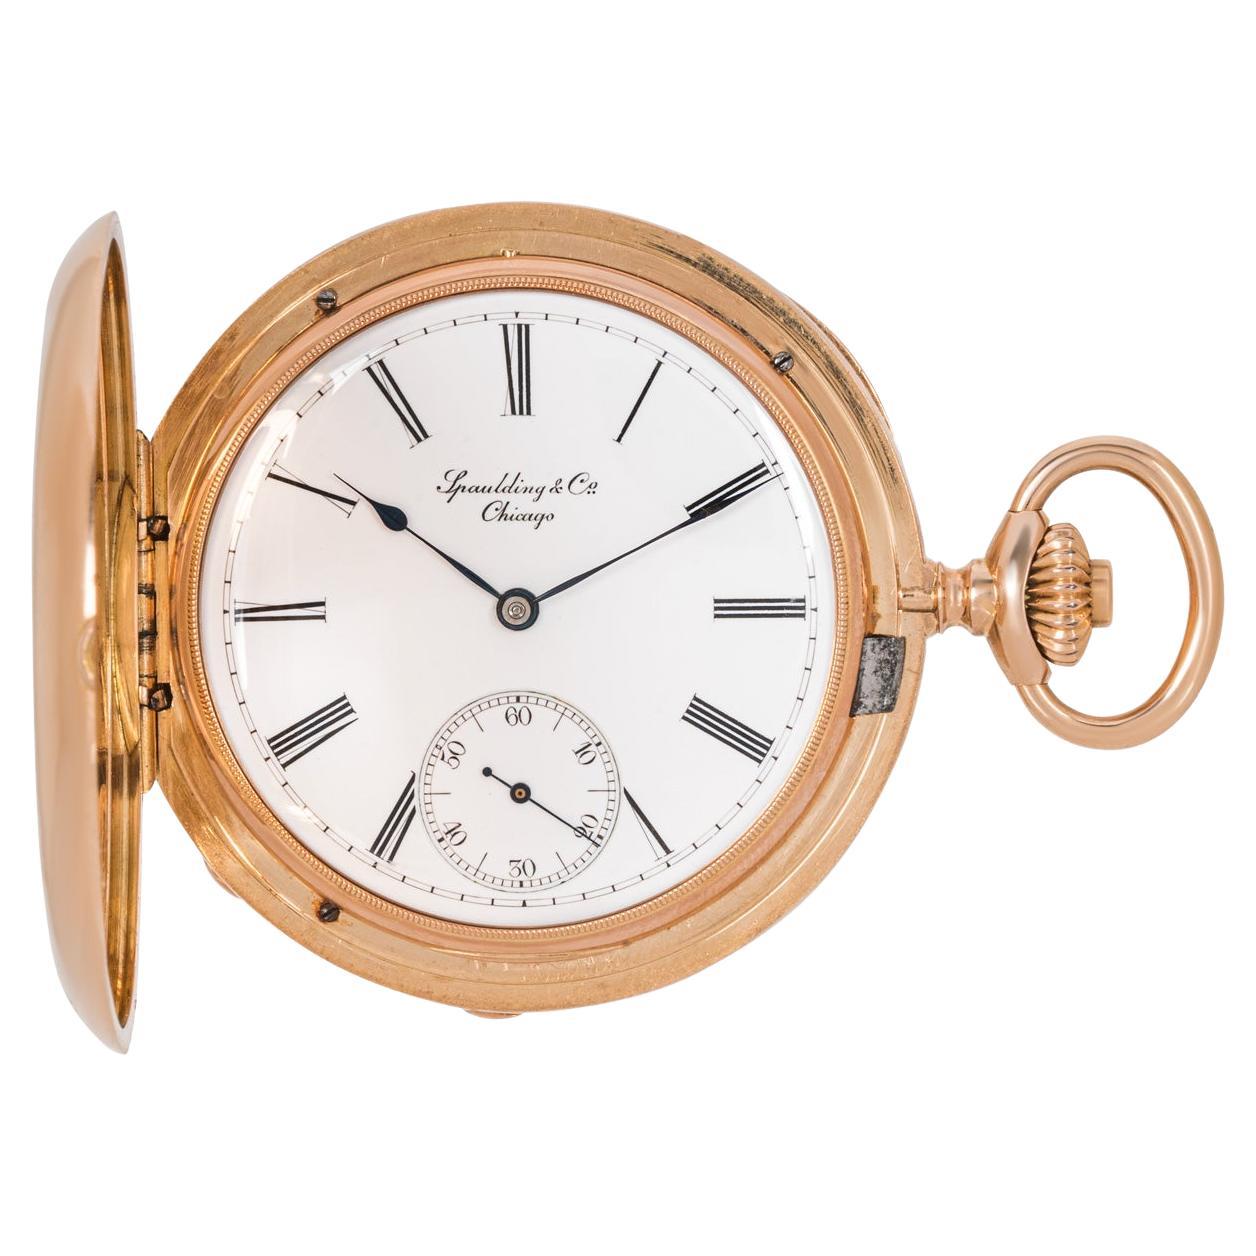 Patek Philippe. A Rose Gold Double Name Spaulding & Co Half Pocket Watch C1888 For Sale